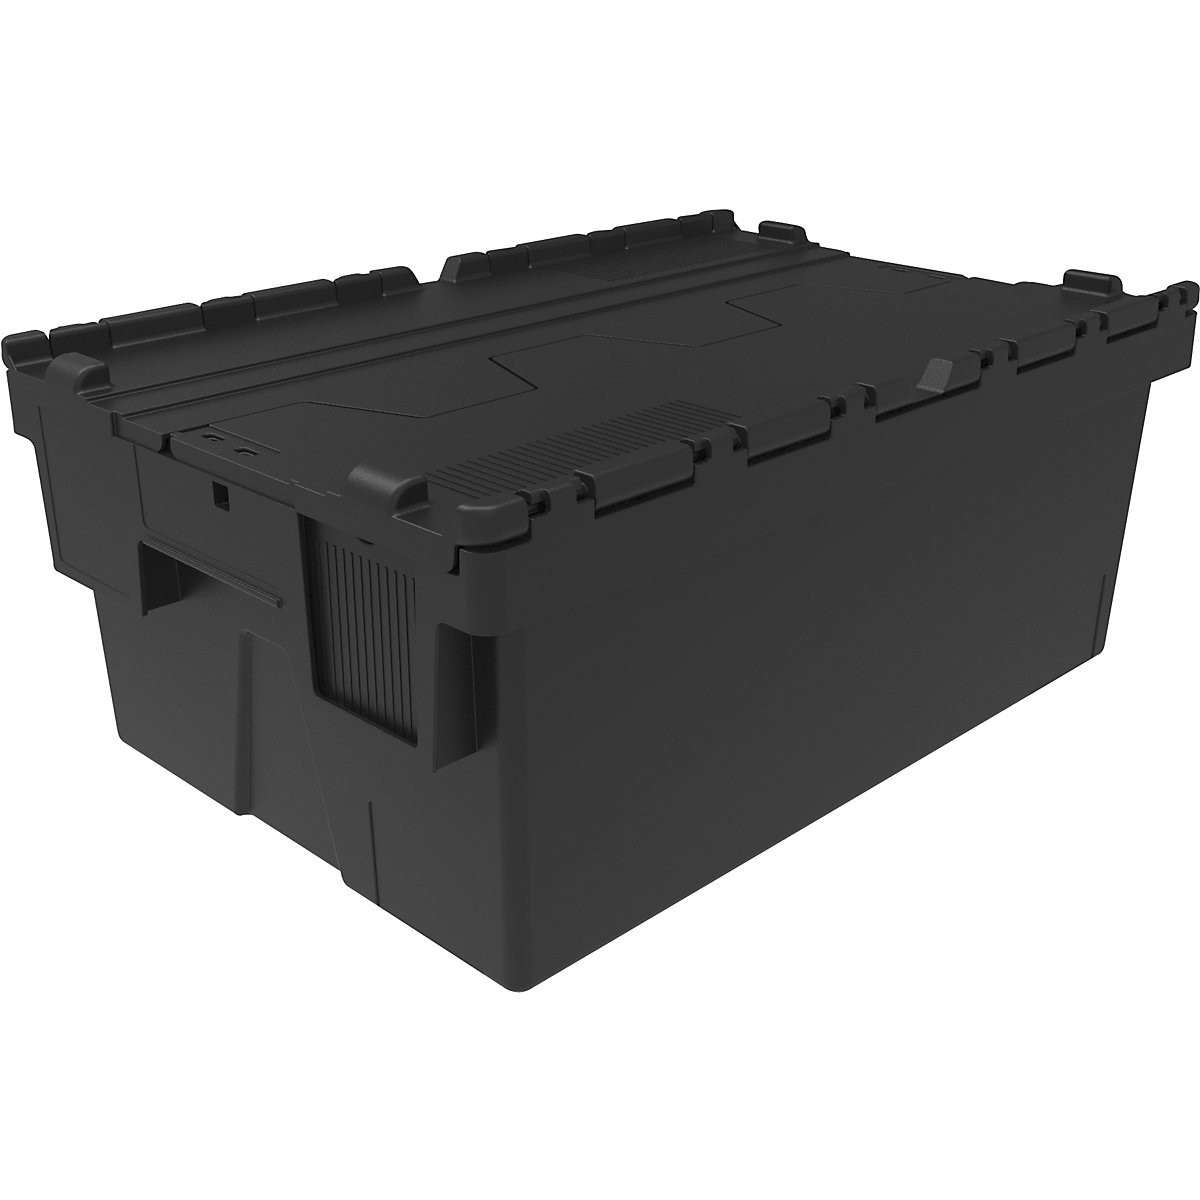 Reusable stacking container, LxWxH 600 x 400 x 250 mm, black-4